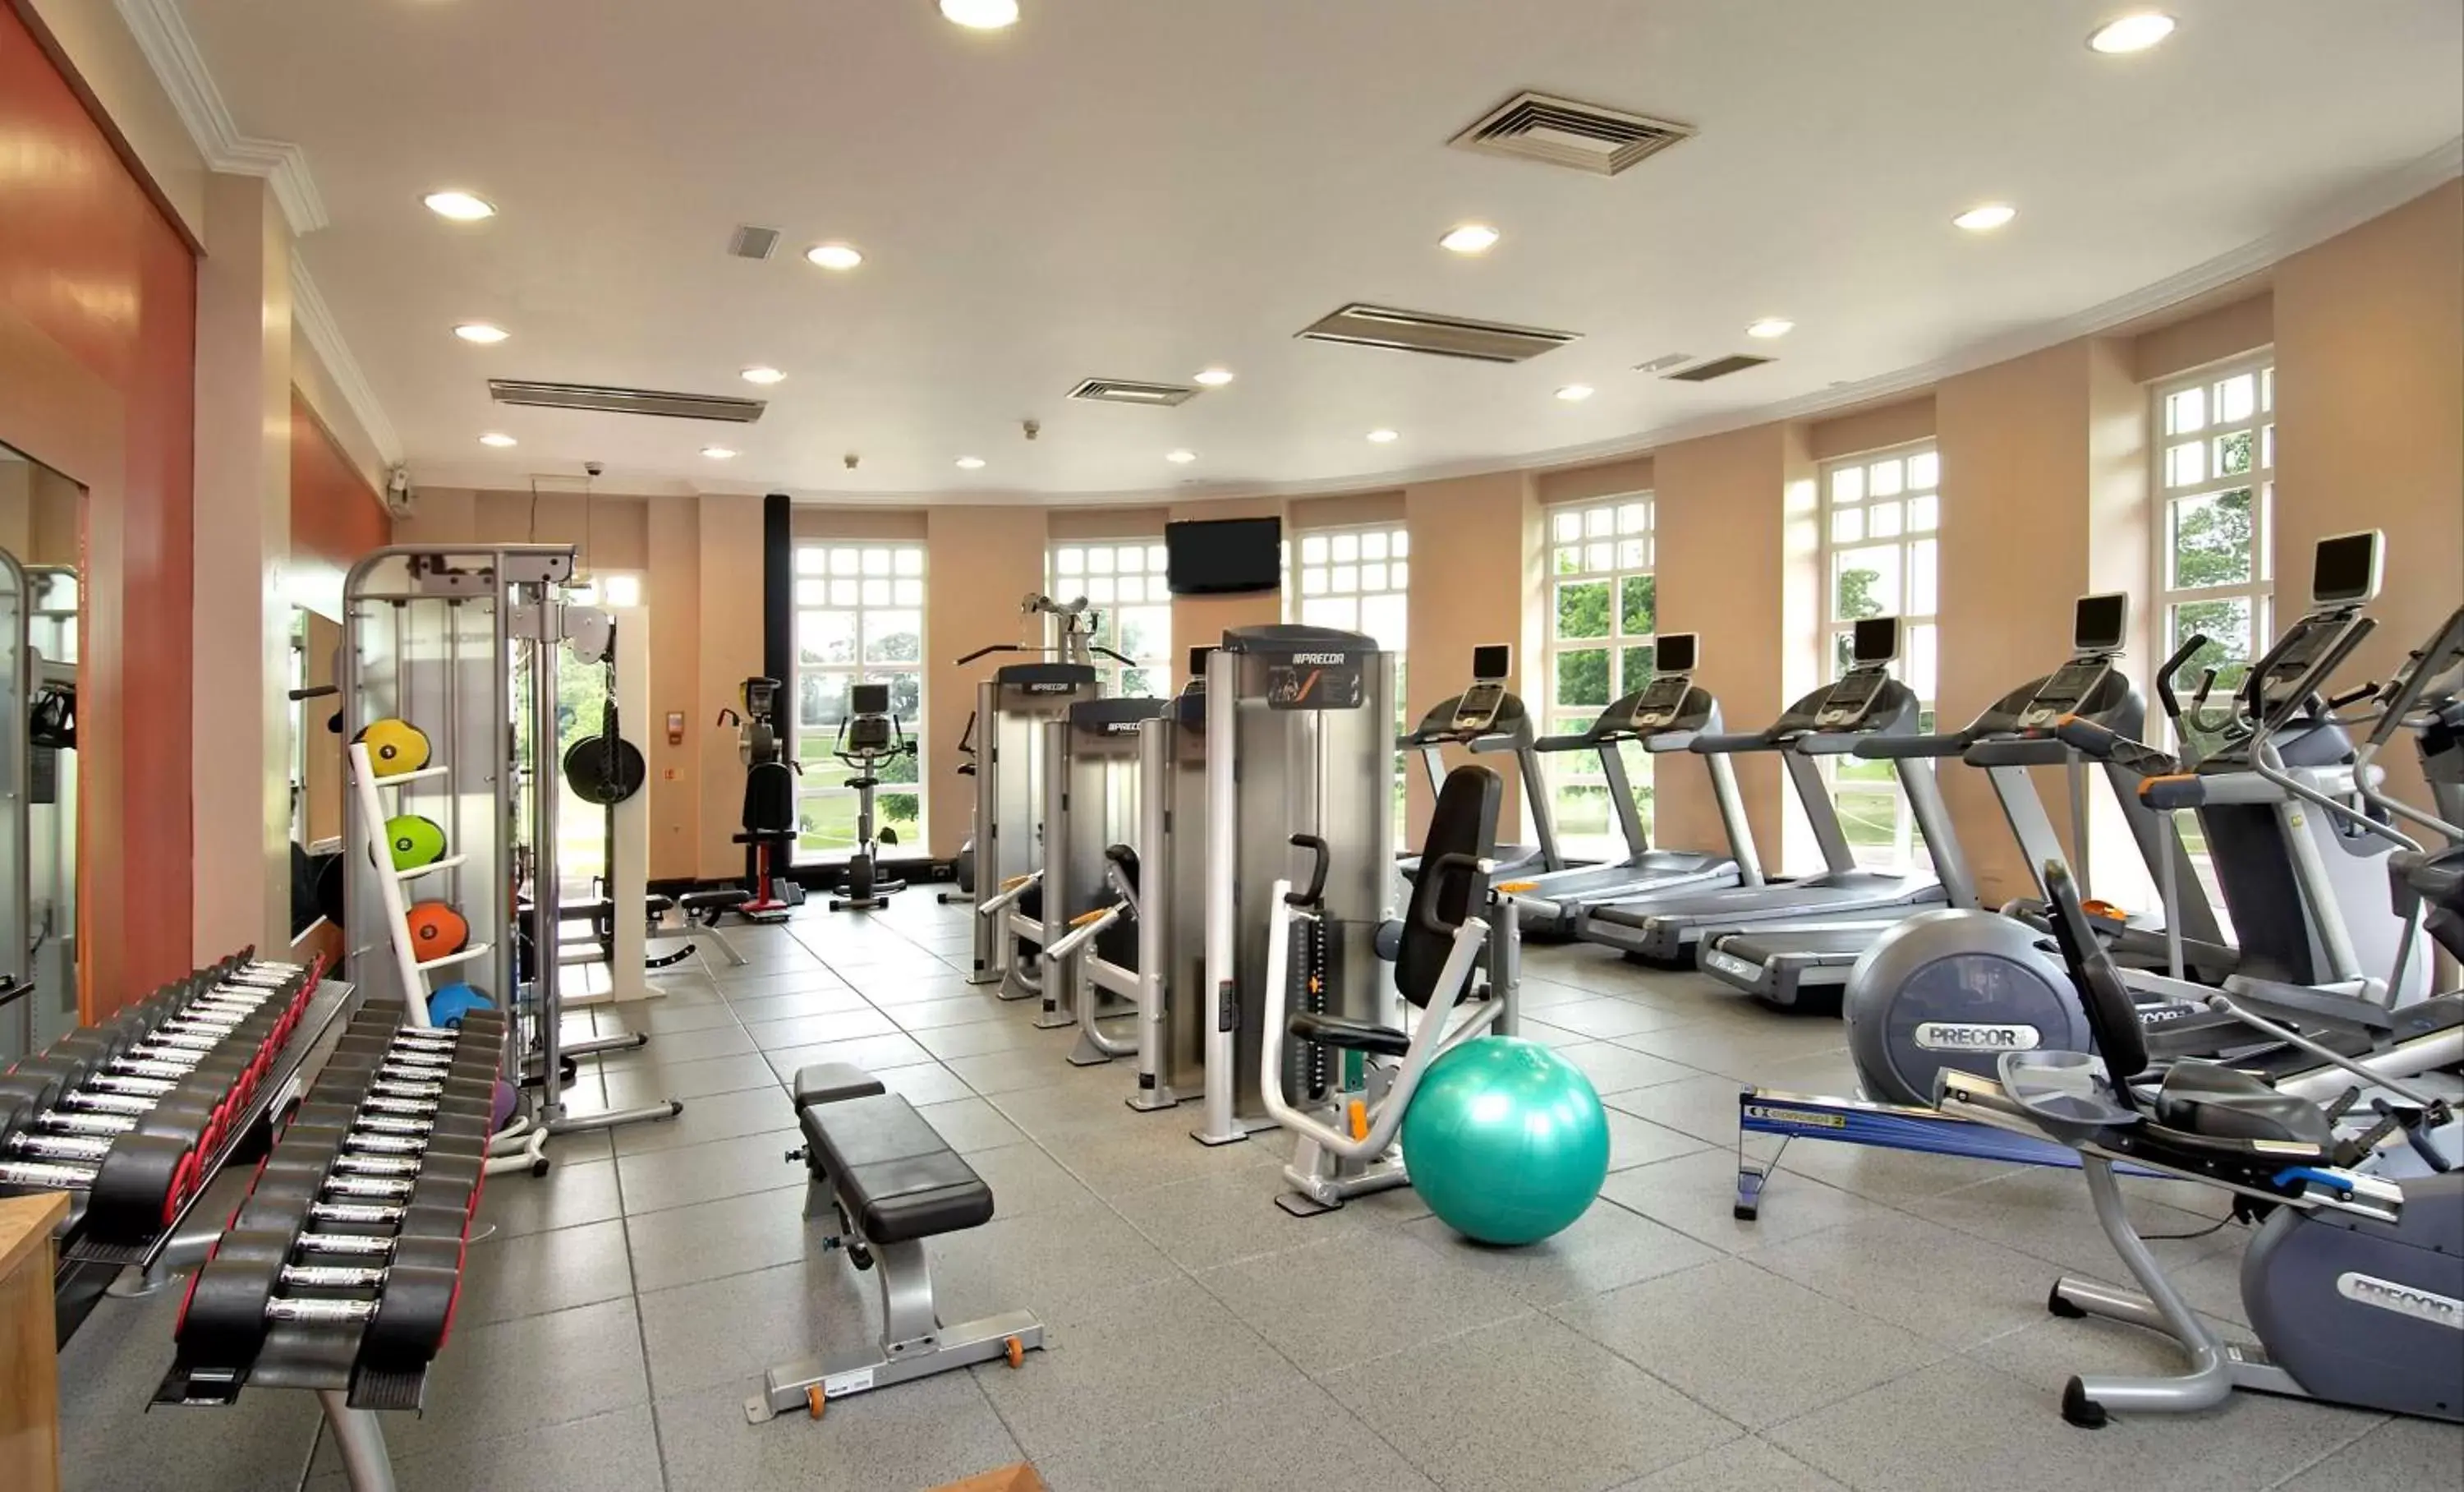 Fitness centre/facilities, Fitness Center/Facilities in Hilton Puckrup Hall, Tewkesbury